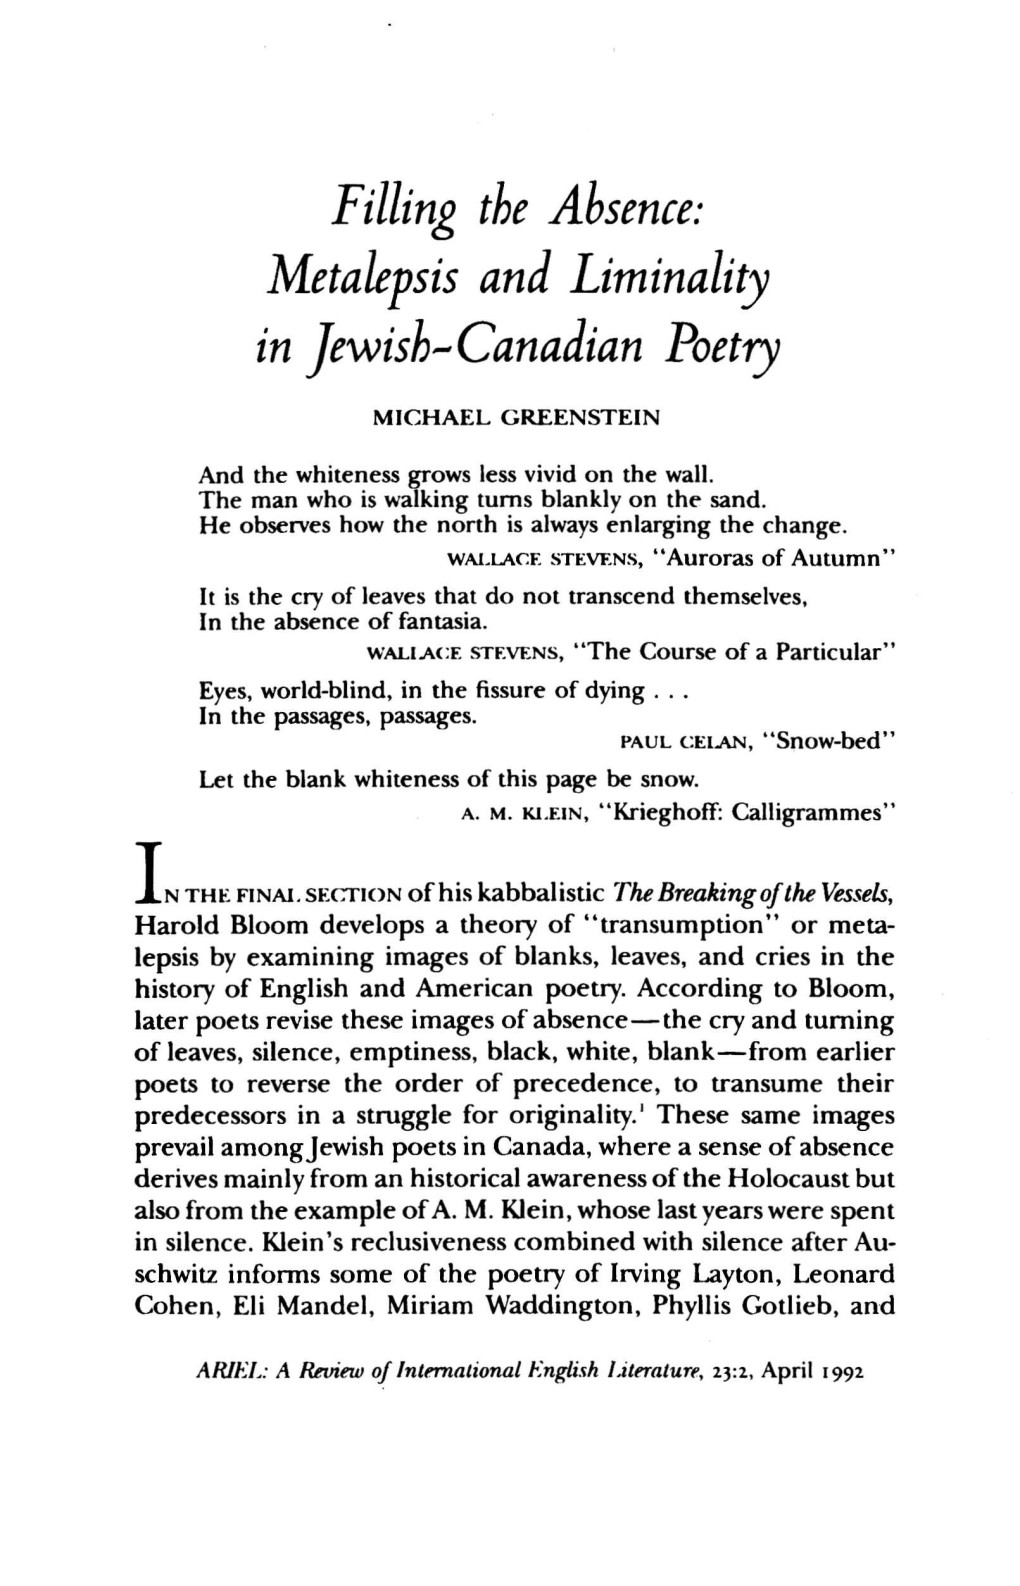 Metalef Sis and Liminality in Jewish-Canadian Poetry